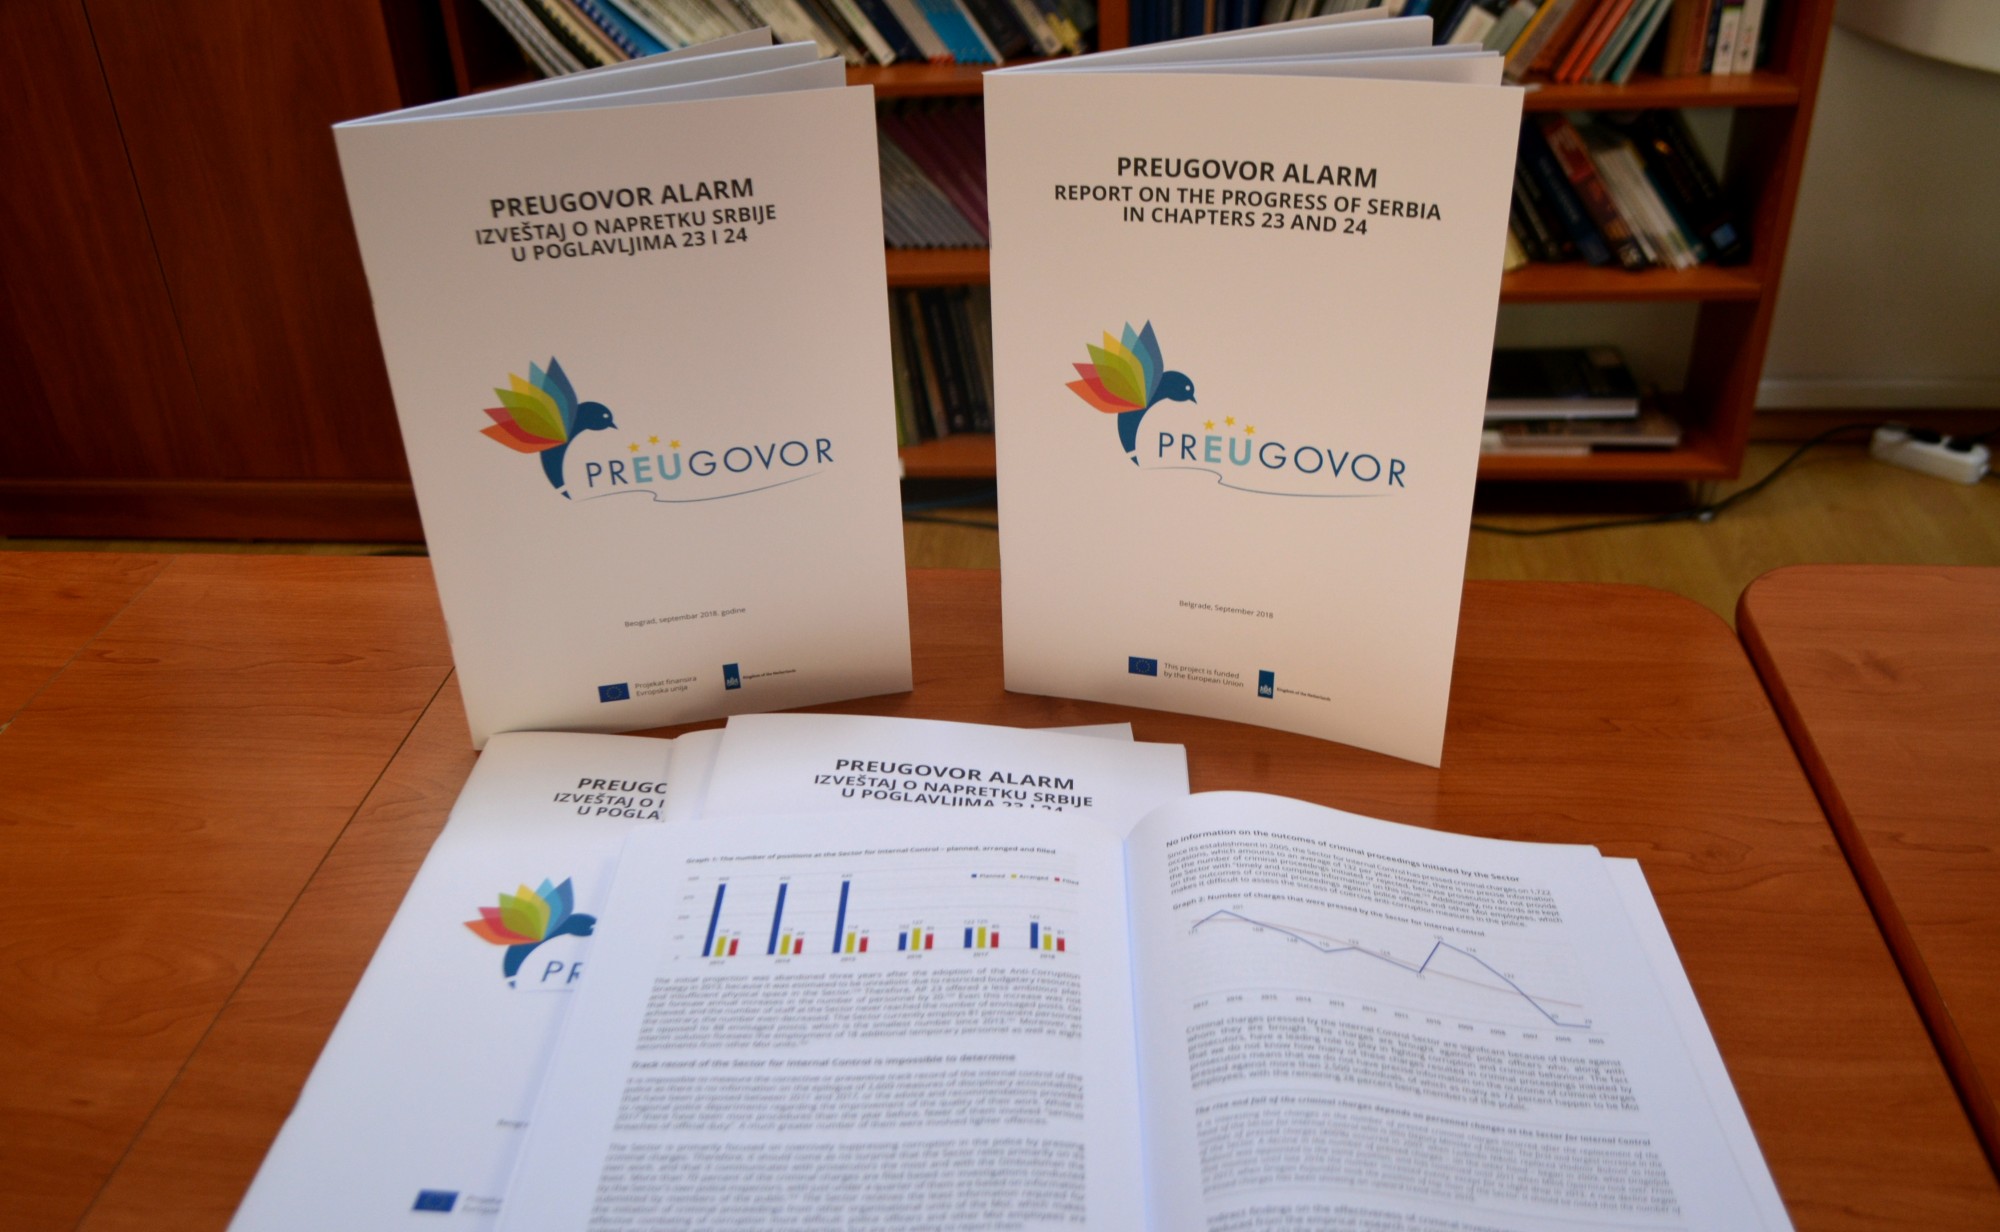 Coalition prEUgovor Report on Progress of Serbia in Chapters 23 and 24 - March 2019